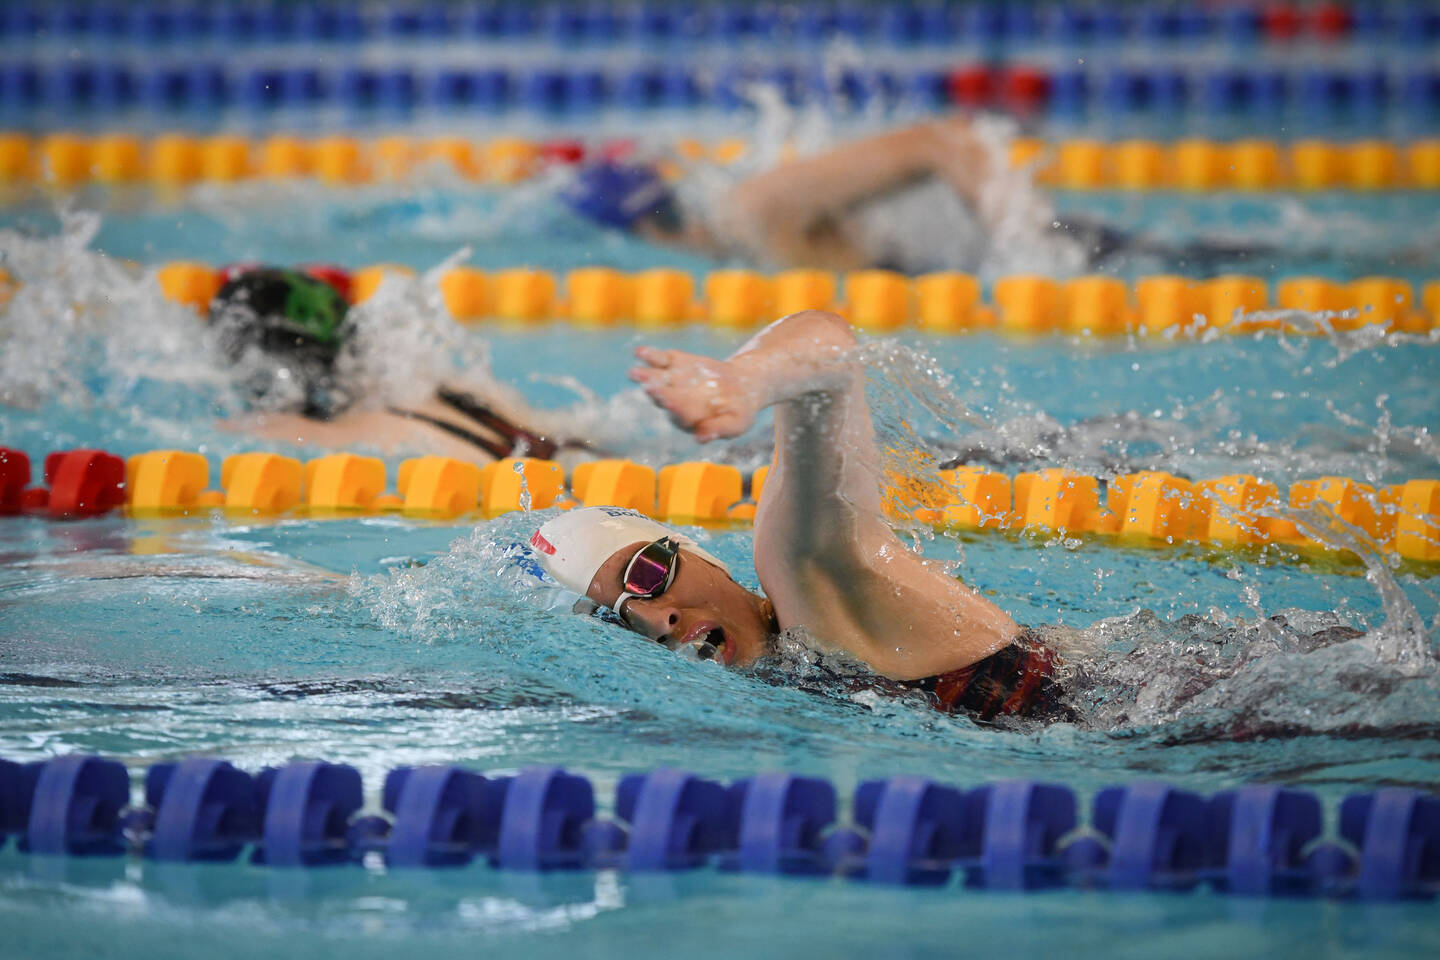 A girl swims front crawl in a pool lane.